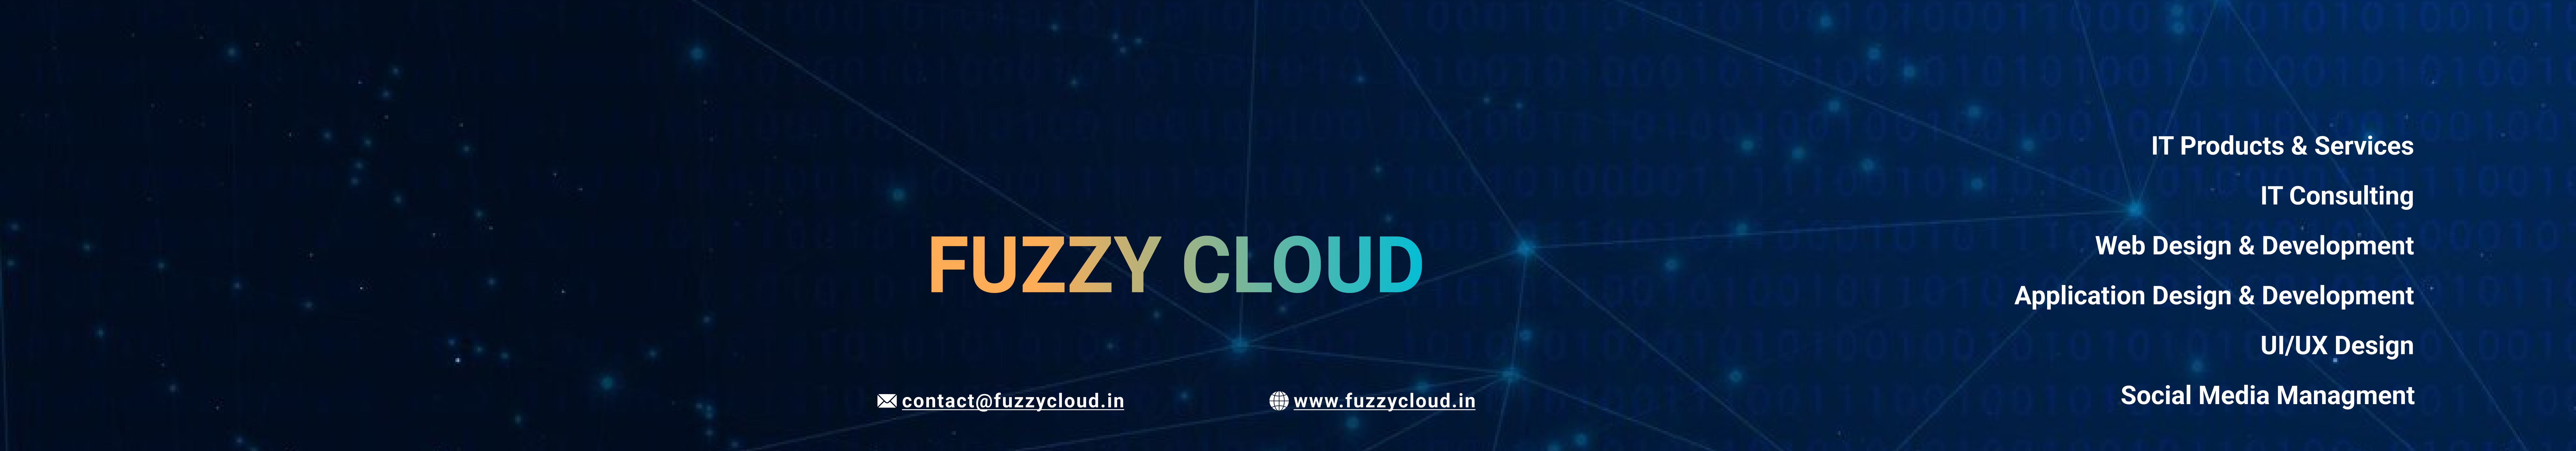 Fuzzy Clouds profilbanner